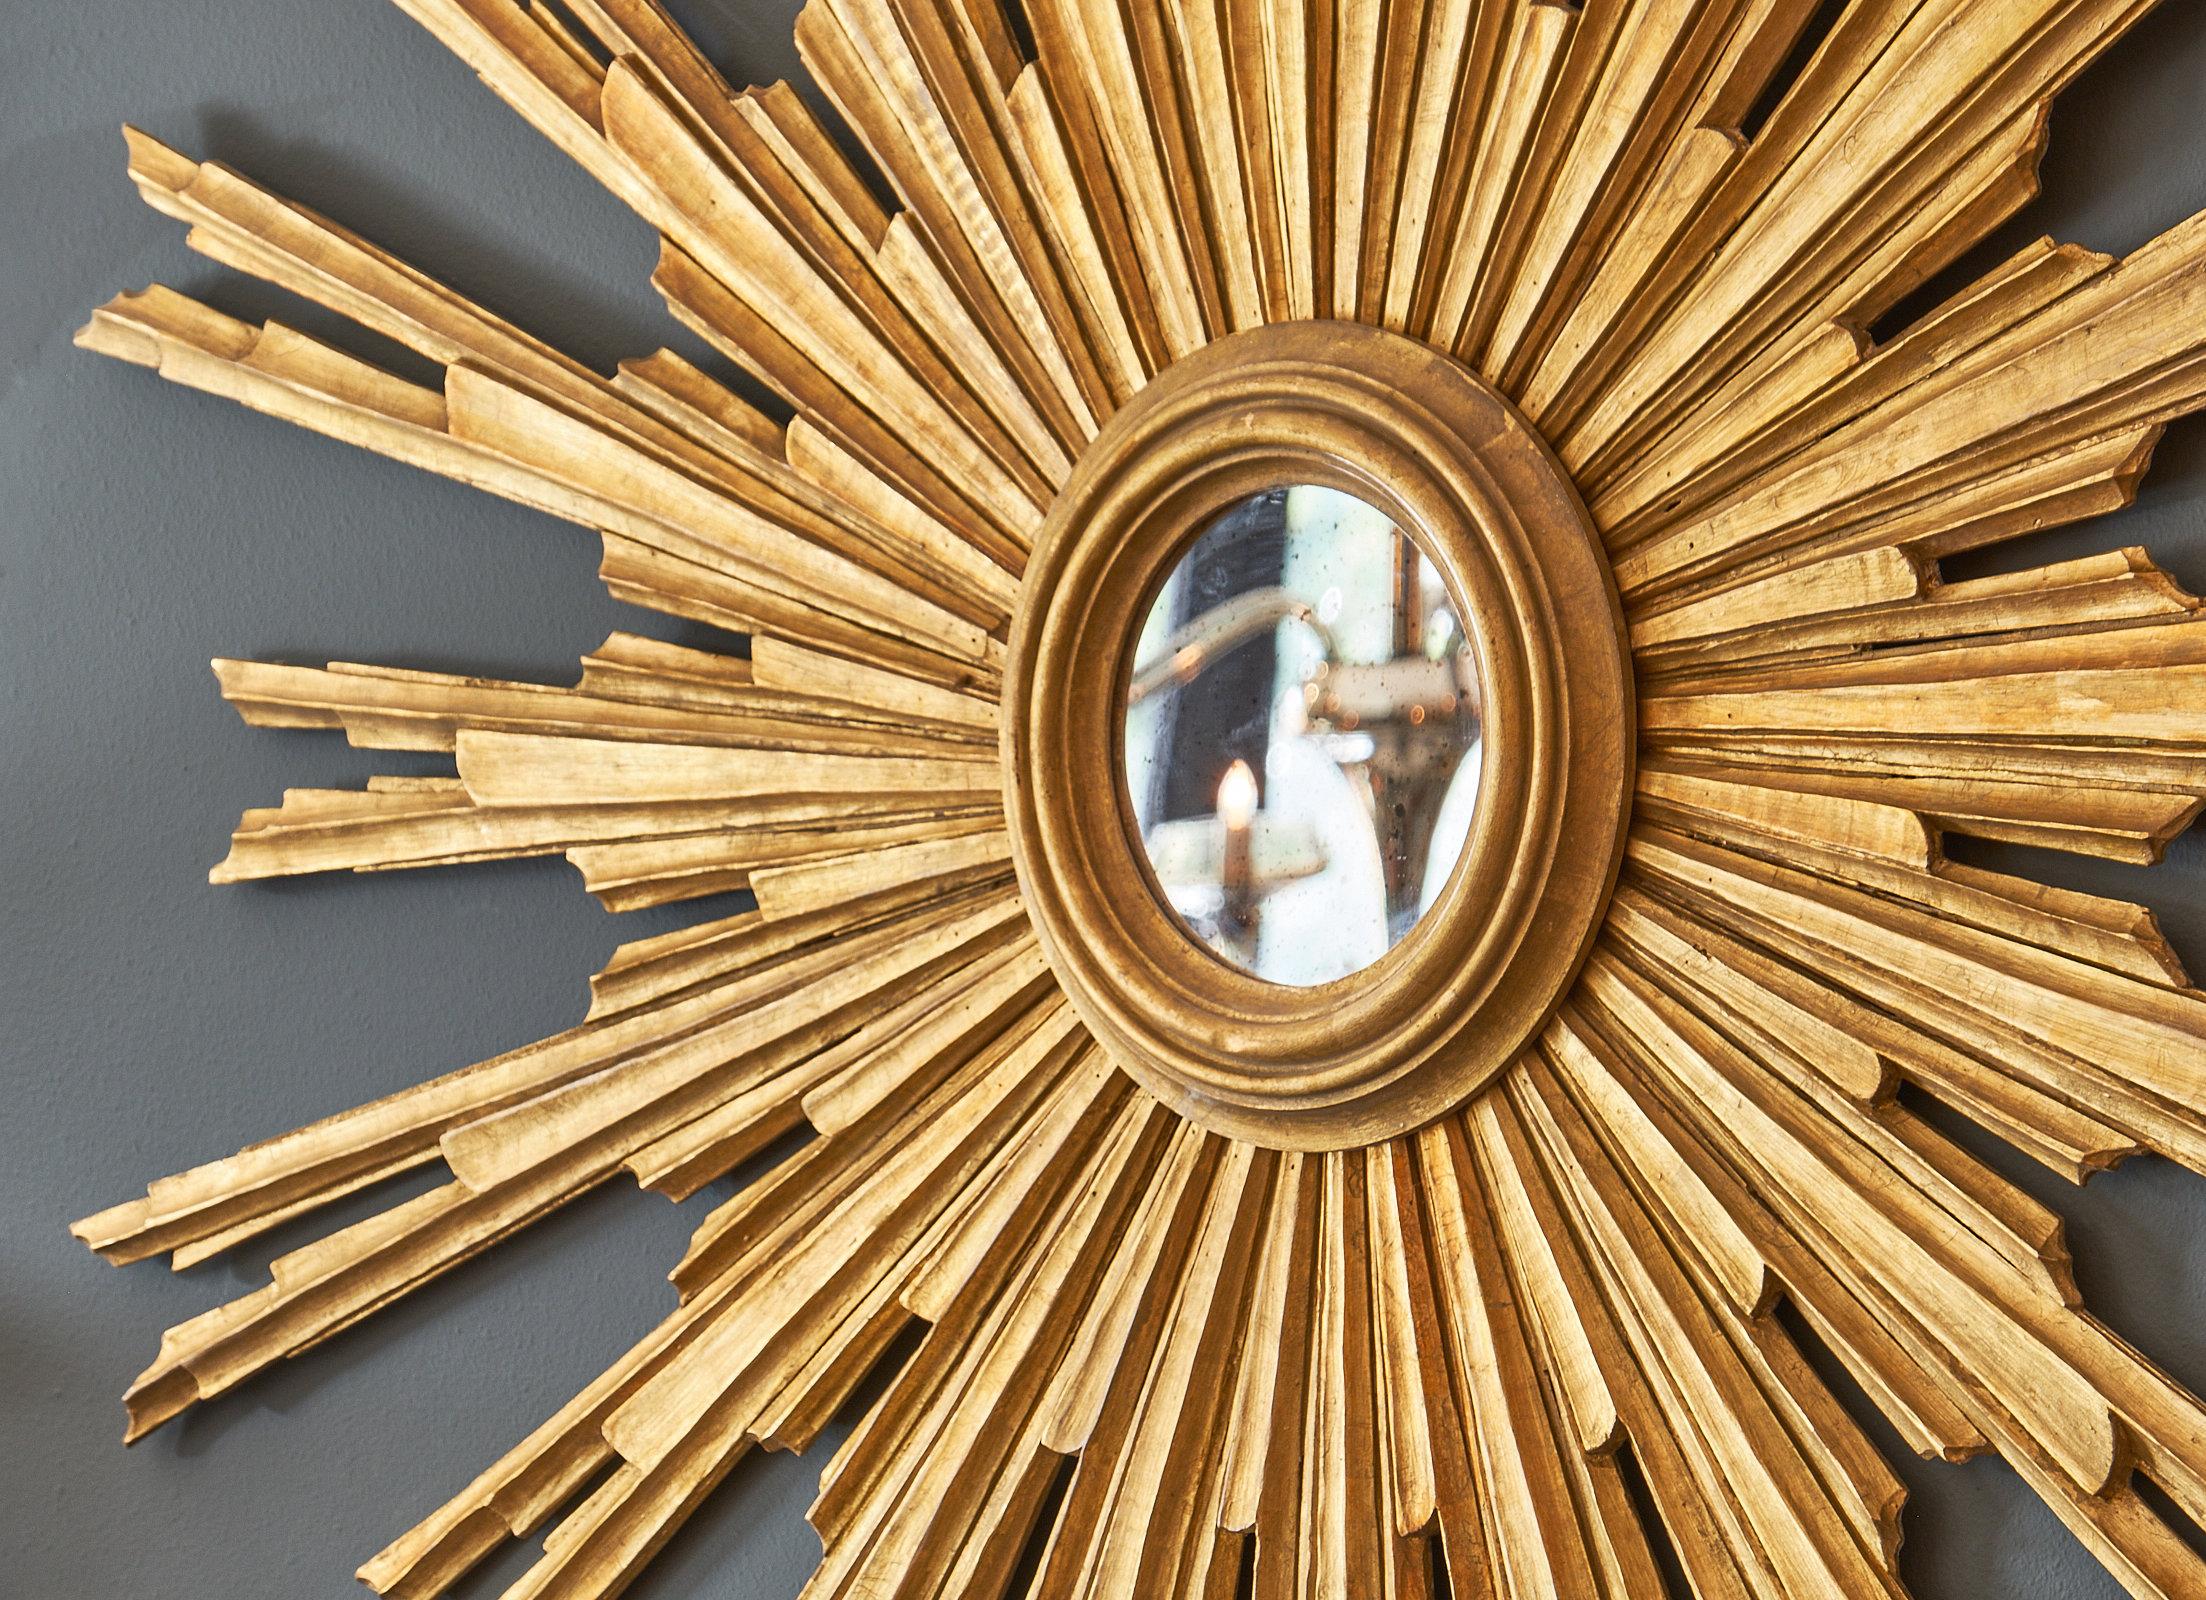 An Italian Renaissance style sunburst mirror featuring multiple hand carved and gold leafed rays and a central round mirror from Florence, Italy.